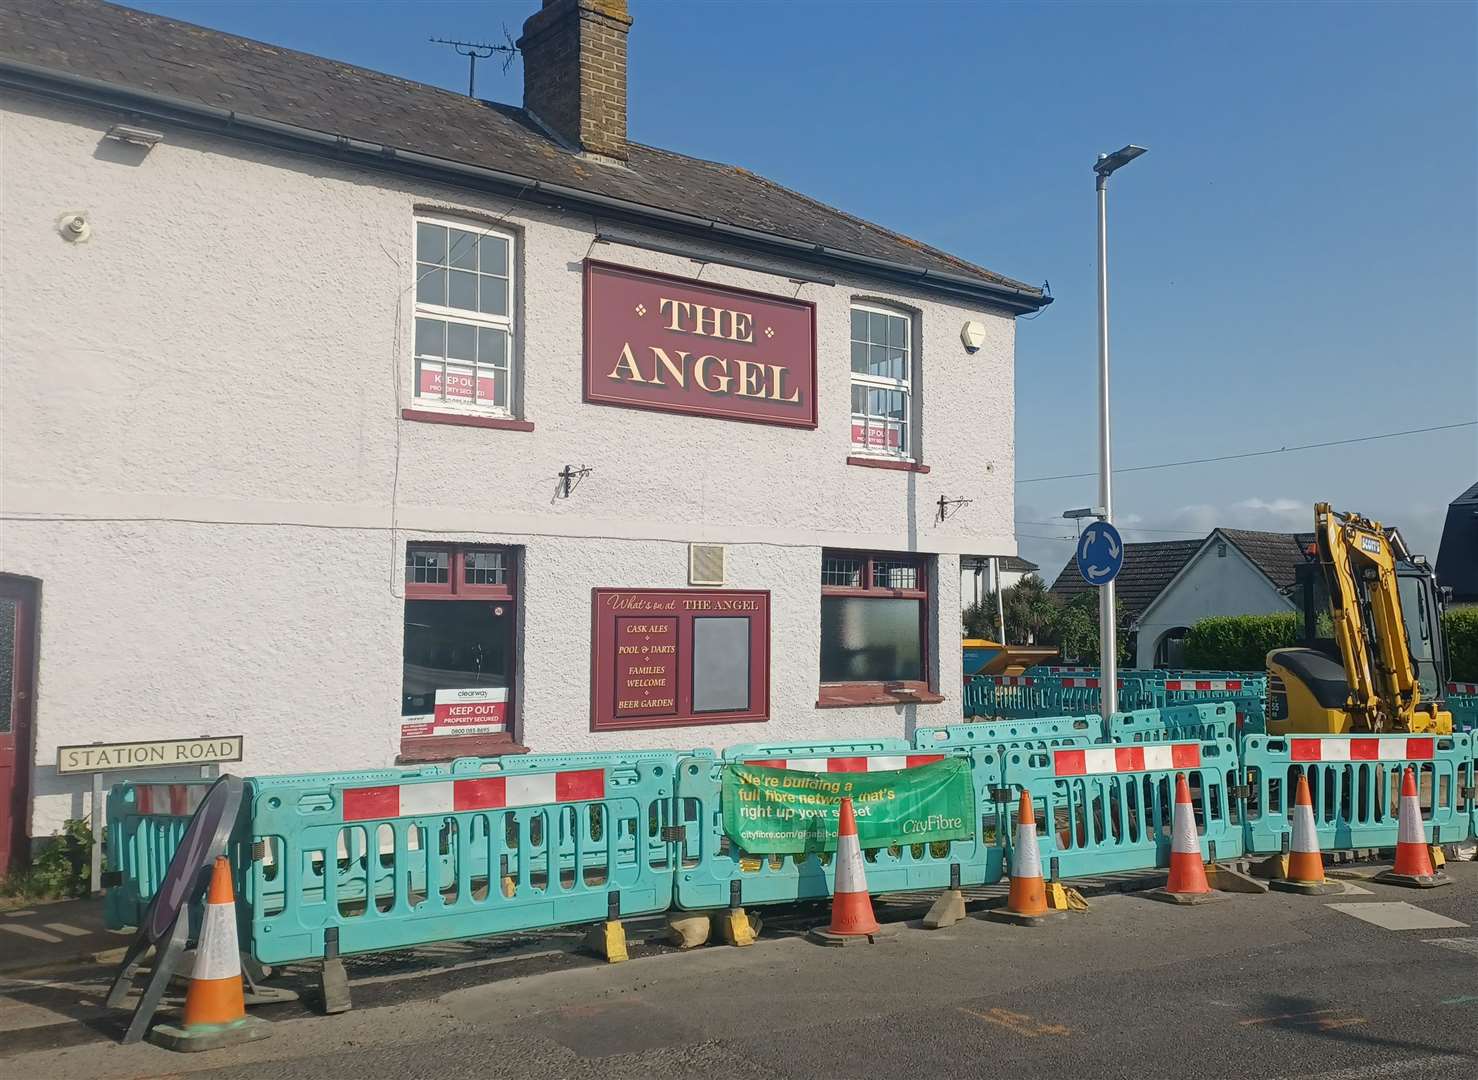 Discussions are taking place to get the pub reopen